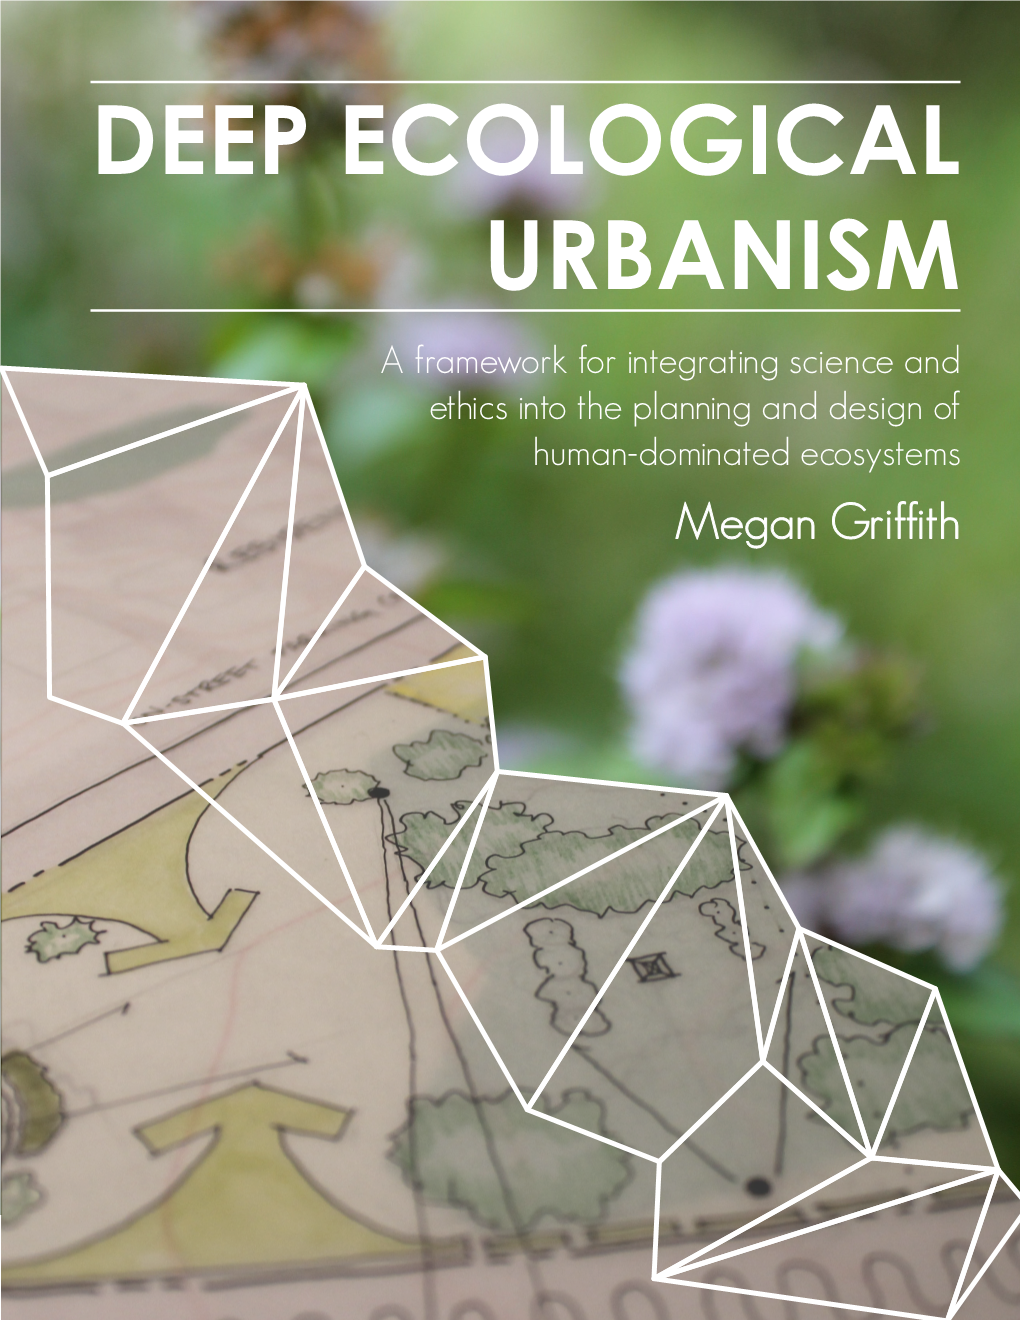 DEEP ECOLOGICAL URBANISM a Framework for Integrating Science and Ethics Into the Planning and Design of Human-Dominated Ecosystems Megan Griffith